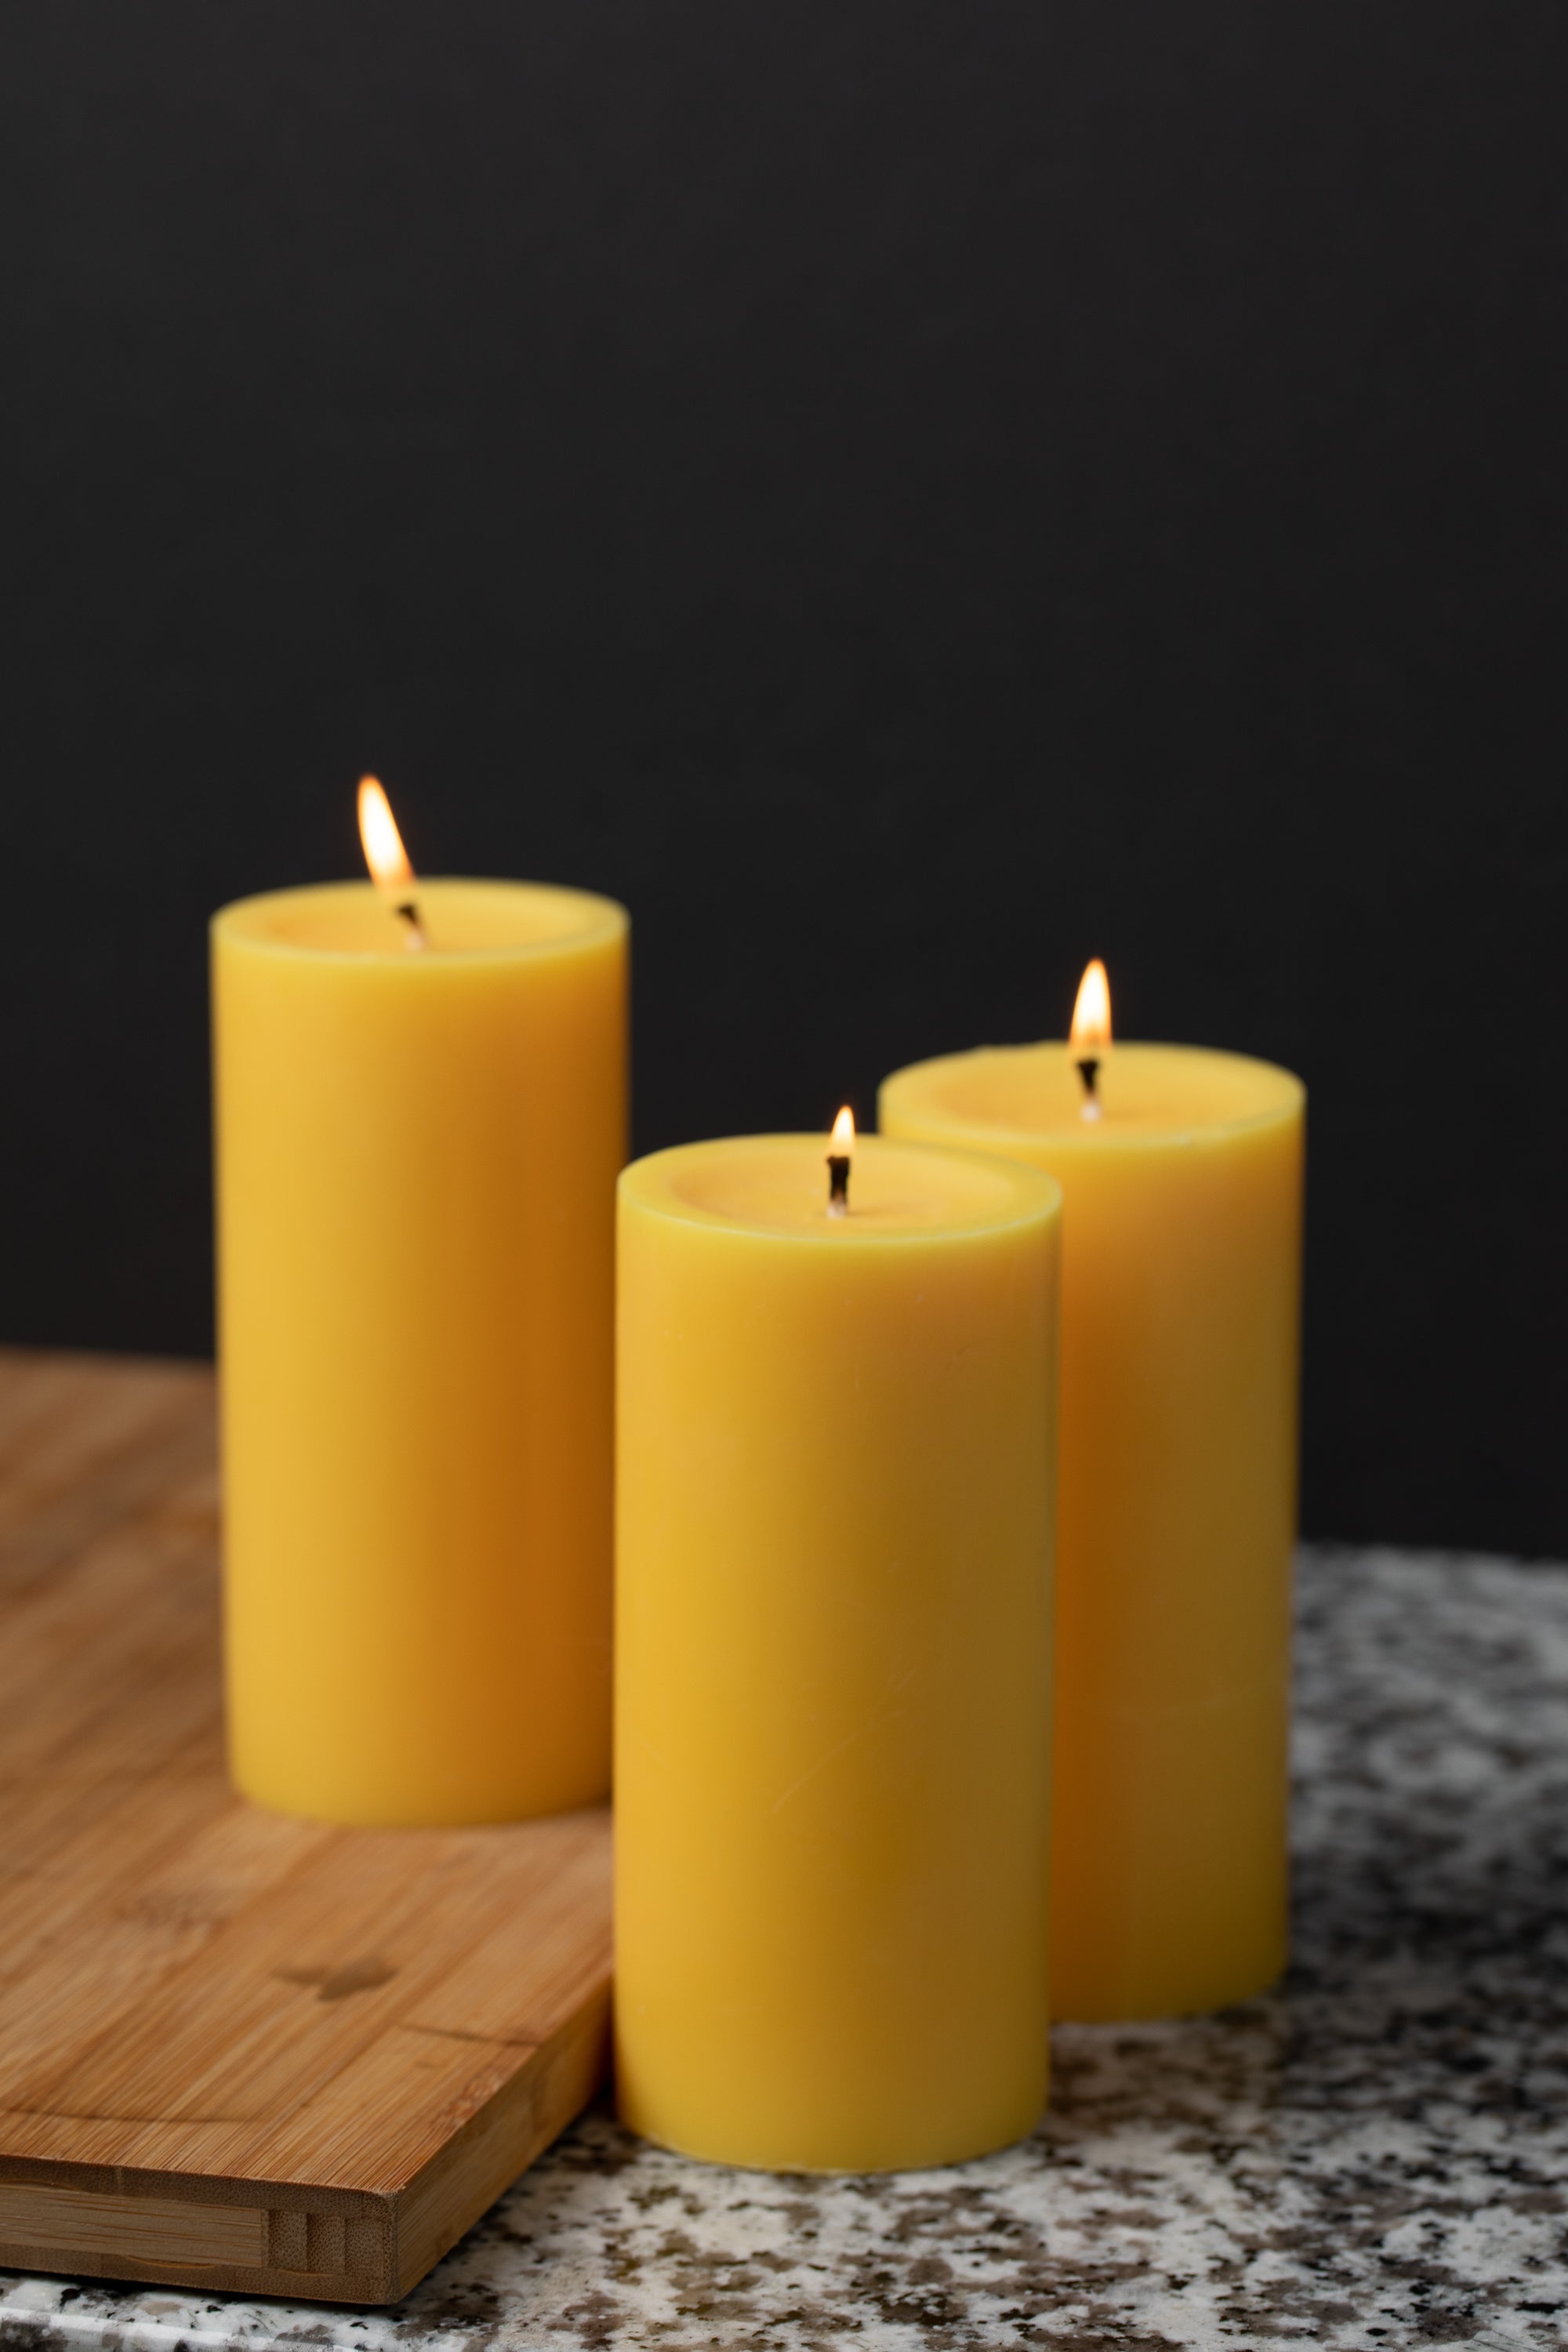 Petaled Pail Beeswax Candle Subscription - Petaled Pail & Company